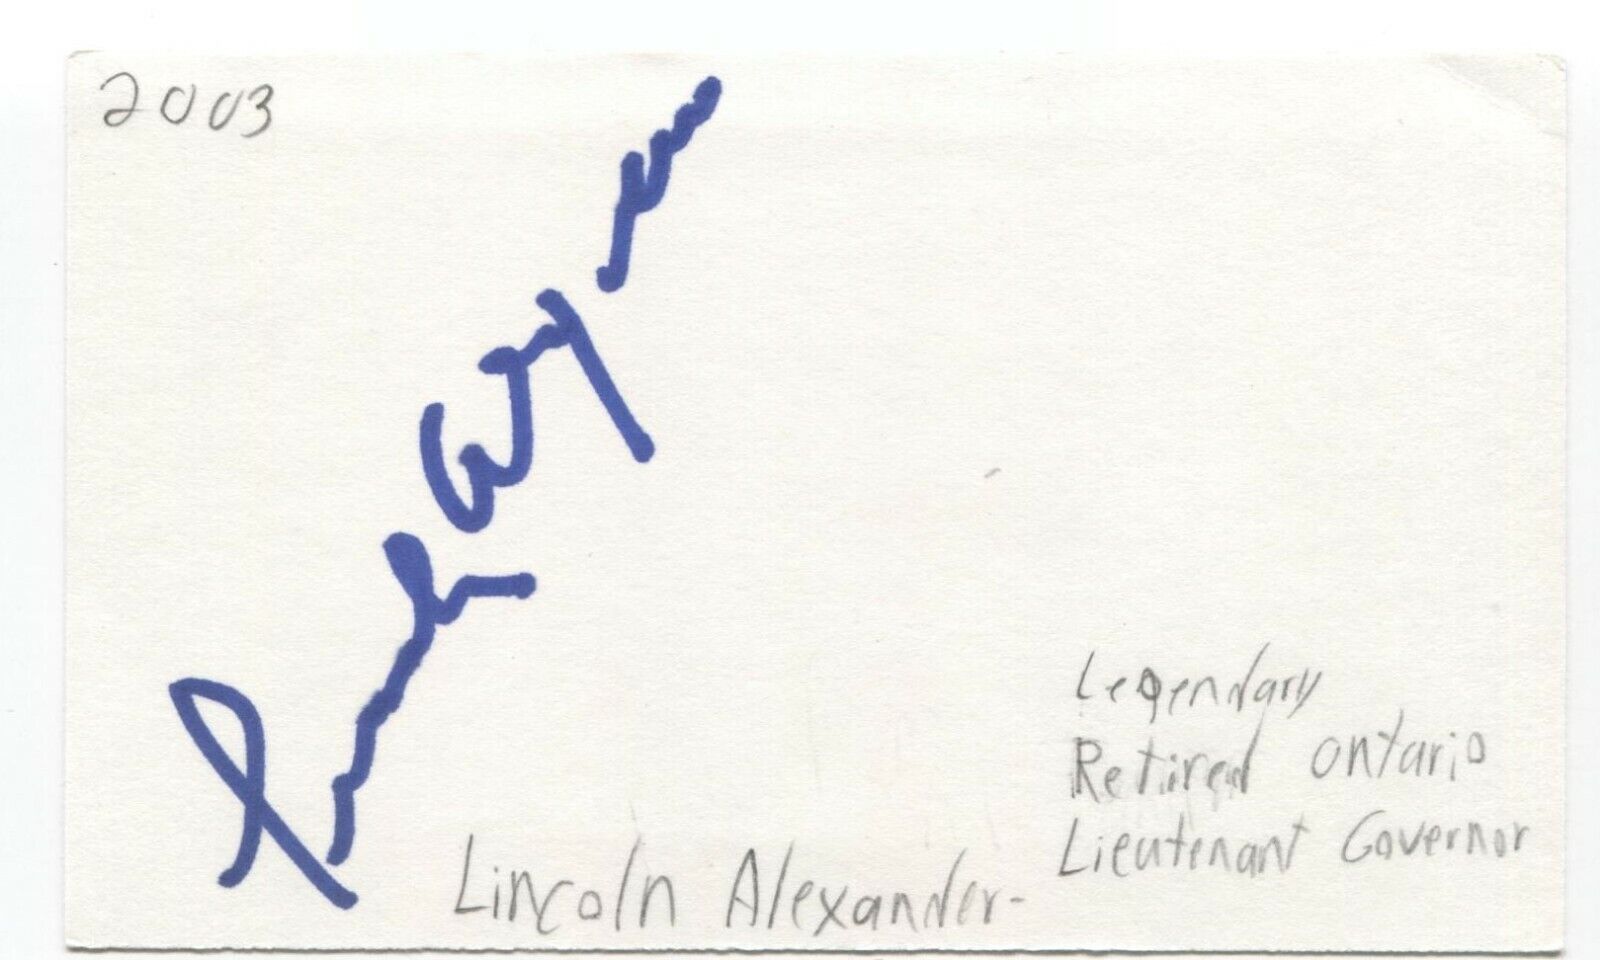 Lincoln Alexander Signed 3x5 Index Card Autographed Signature Politician